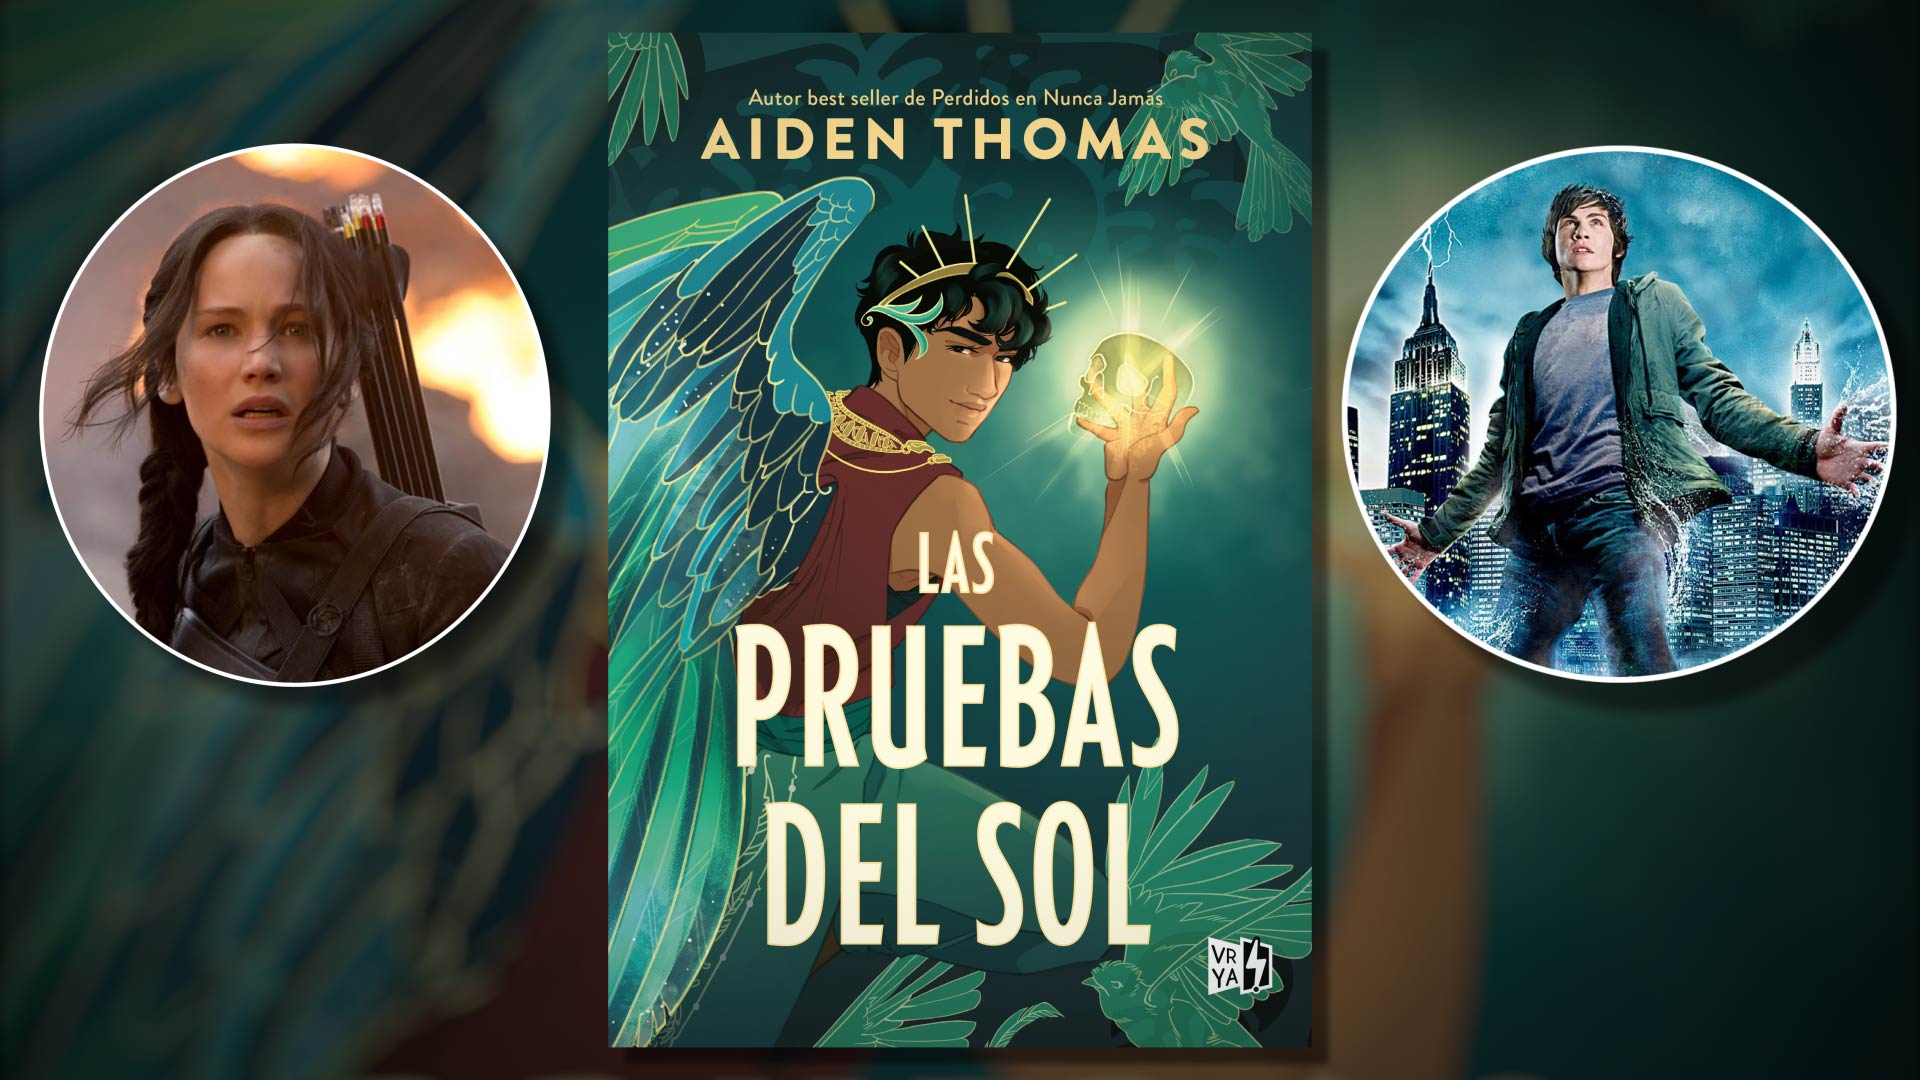 "The tests of the Sun"the third novel by the young American writer Aiden Thomas, is inspired by Mexican mythology and brings its imaginary to the present while adding diversity with its inclusion of trans characters and the use of inclusive language. 